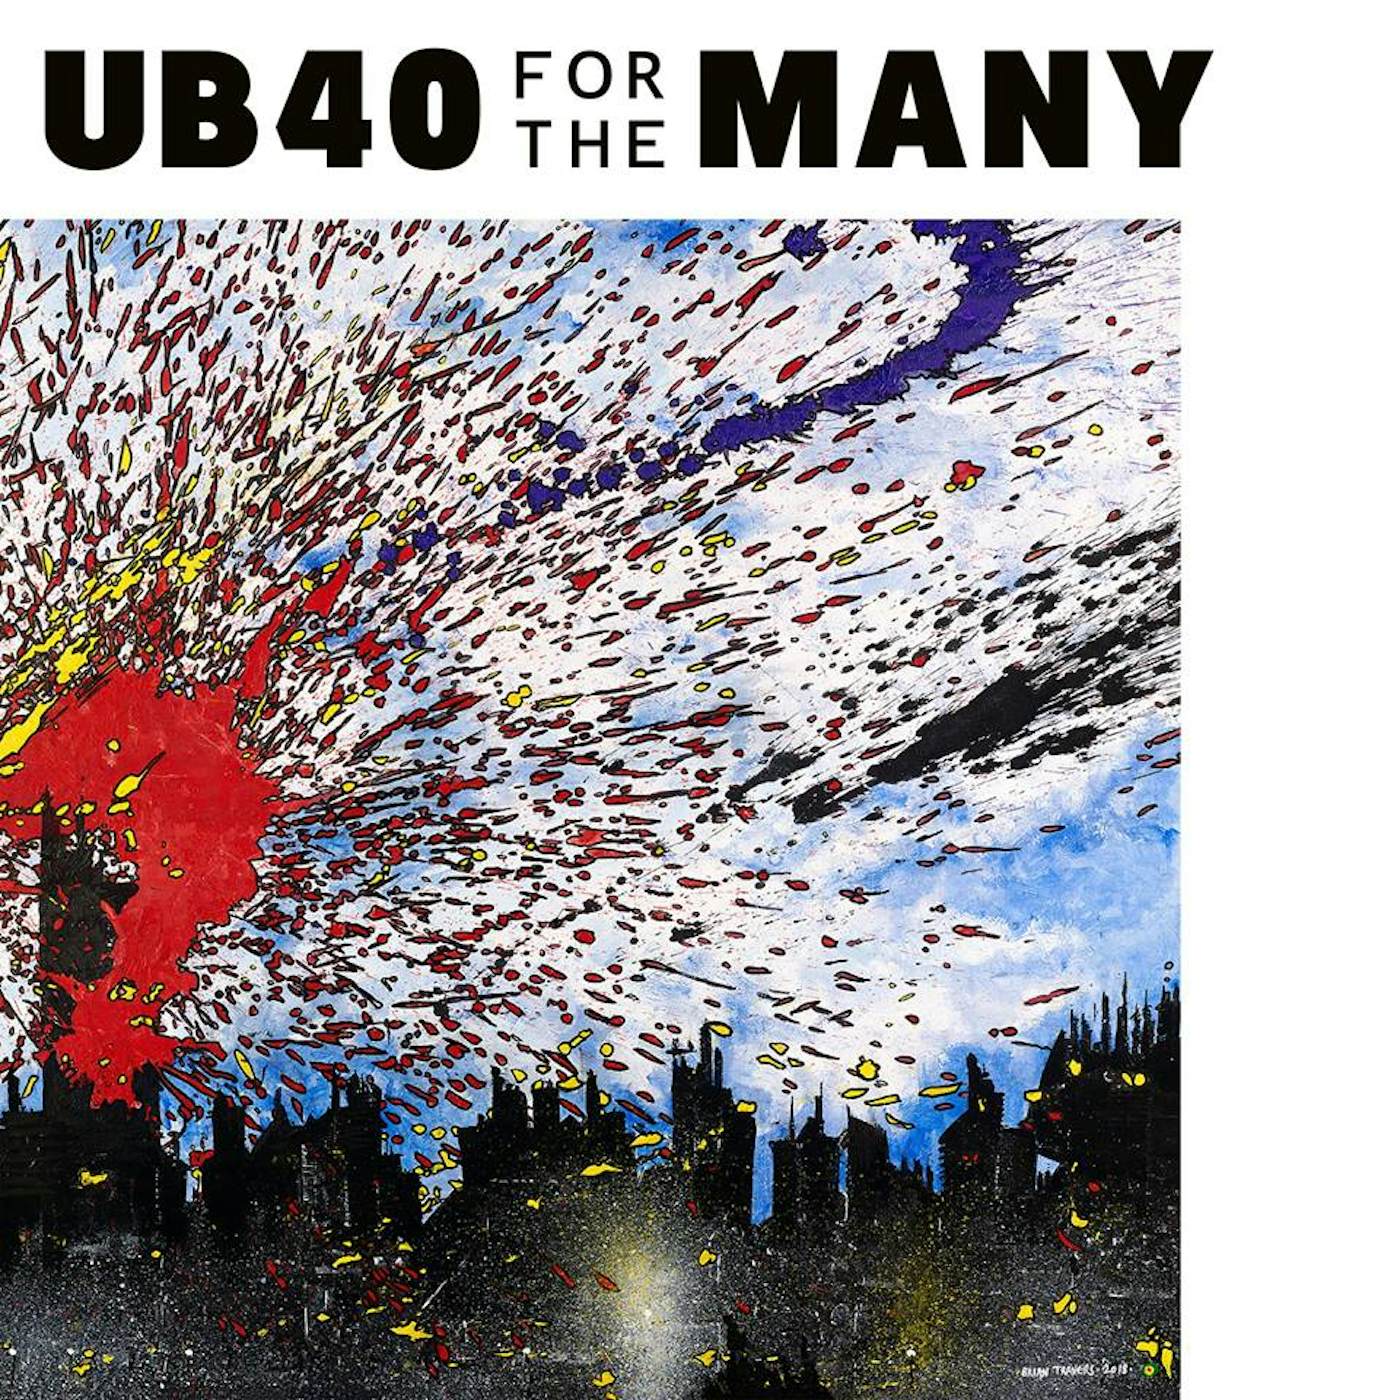 UB40 FOR THE MANY CD